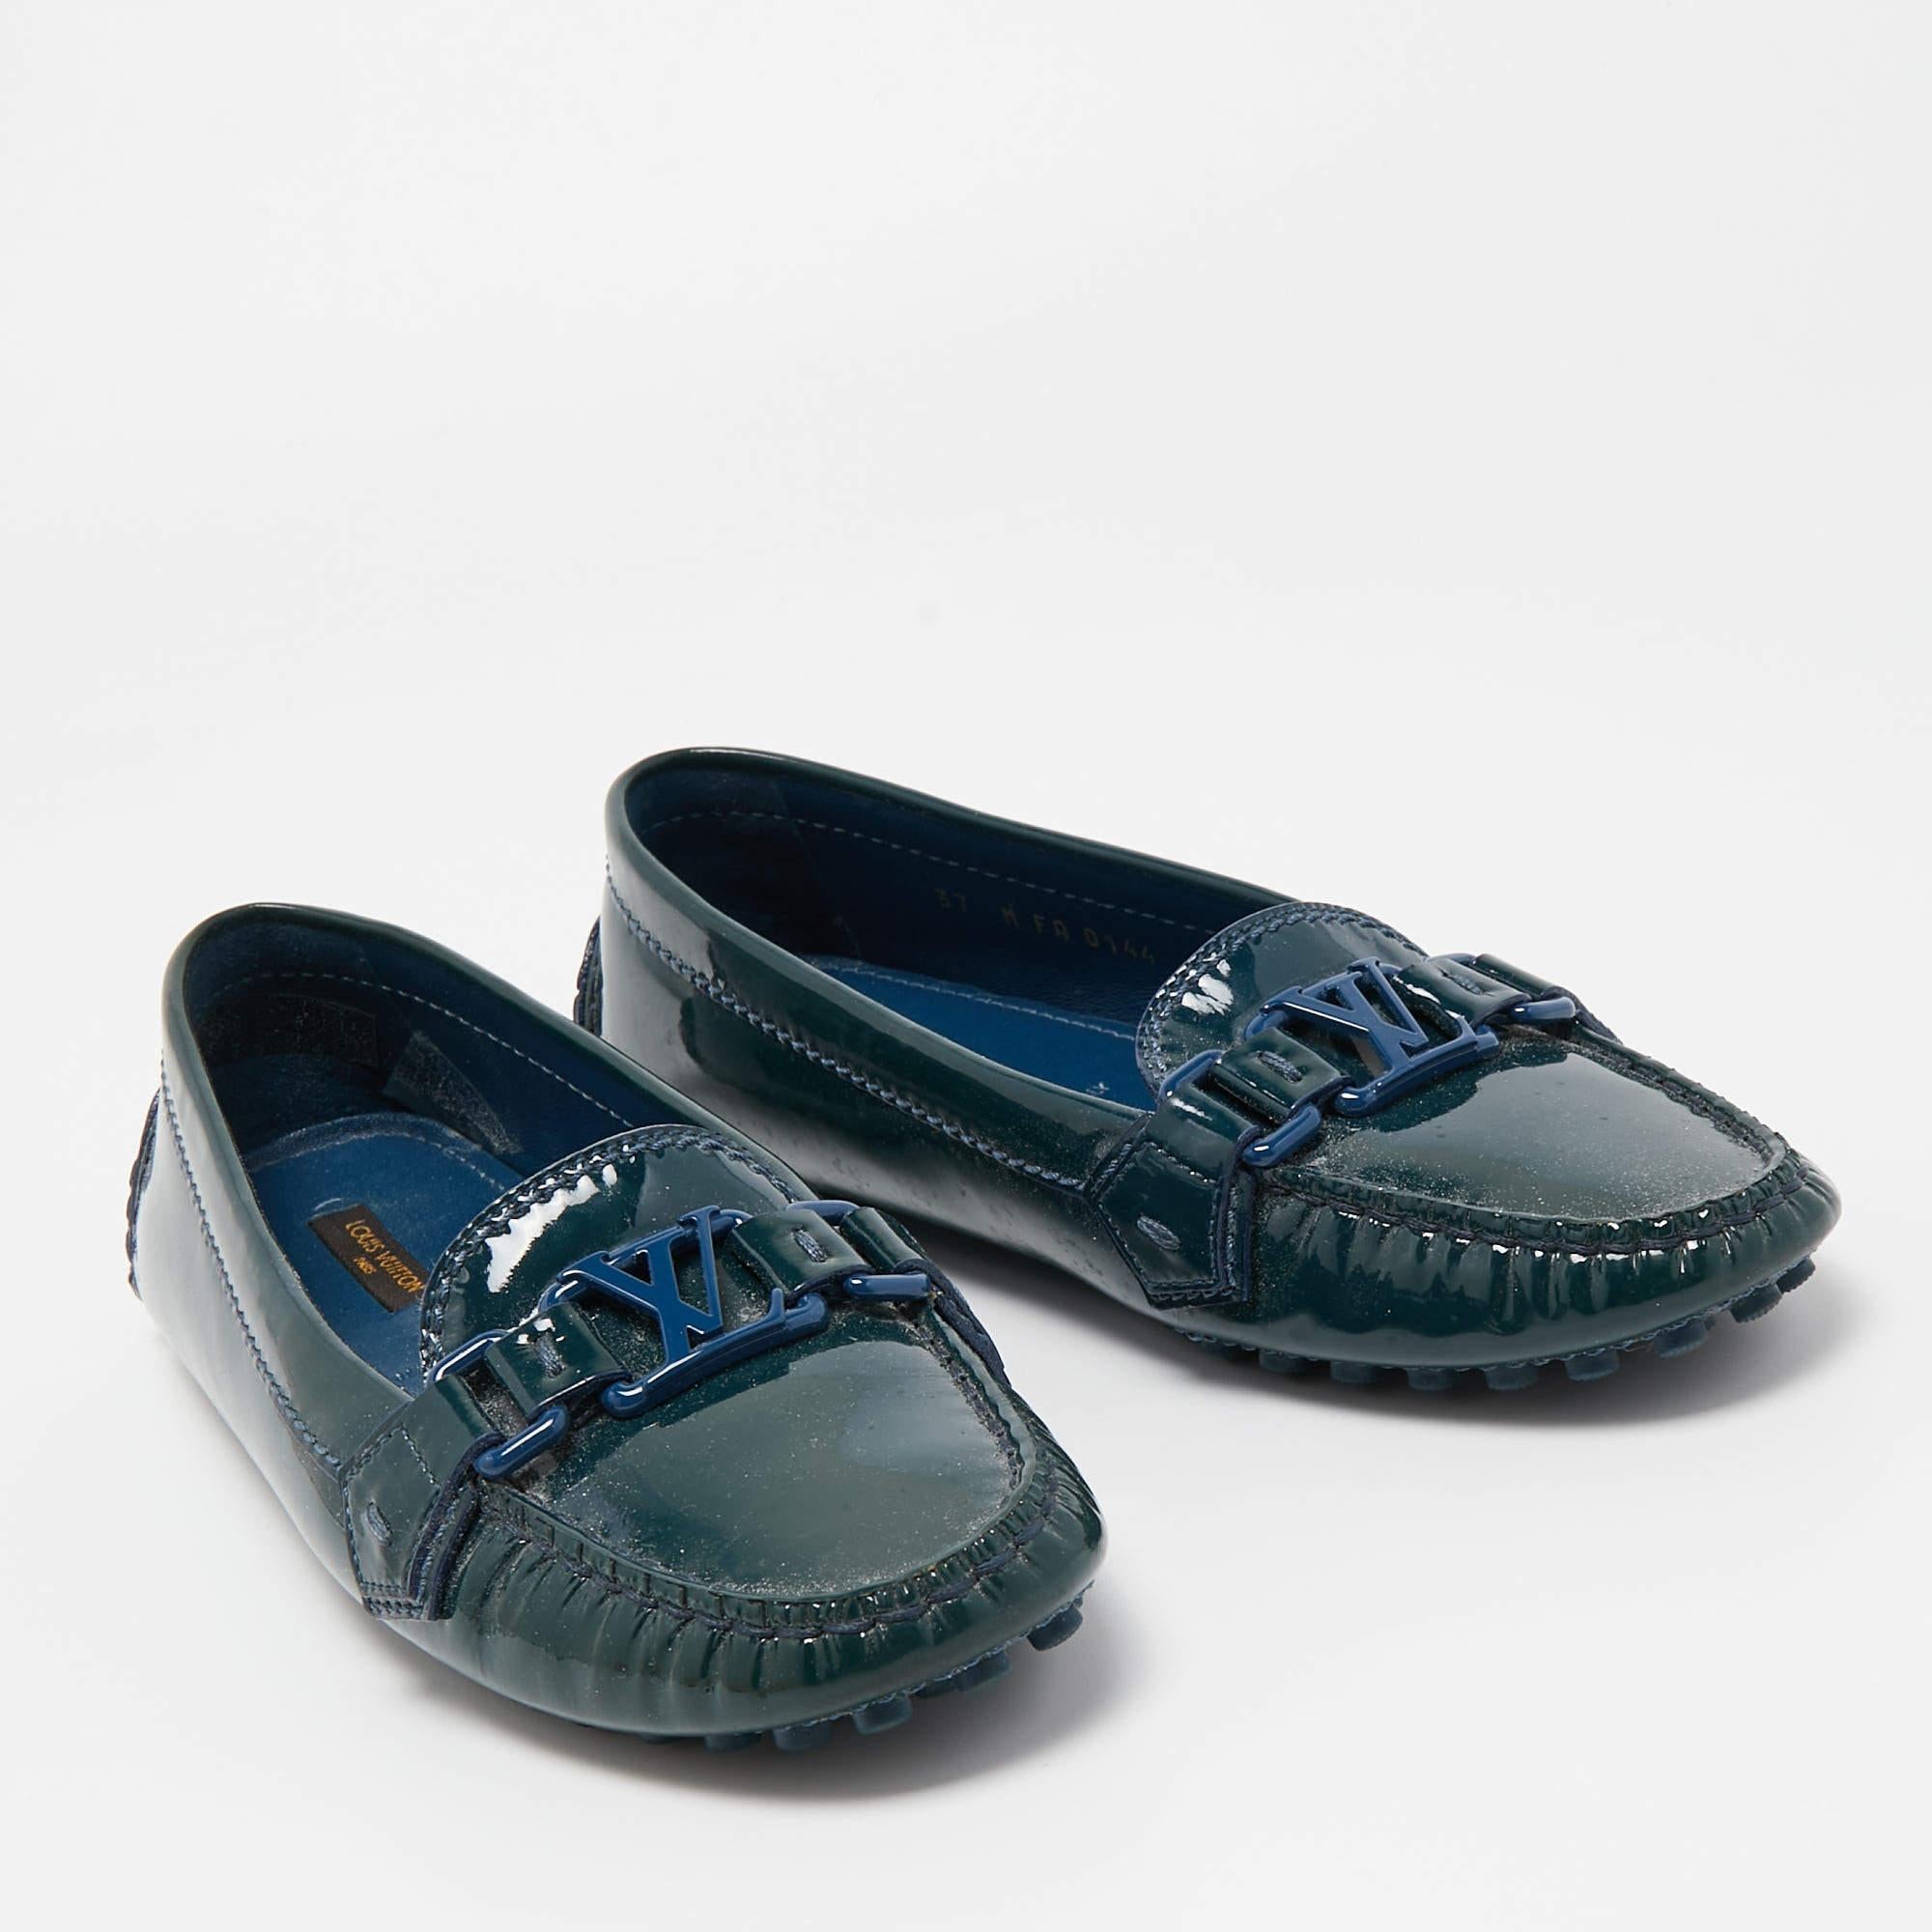 Louis Vuitton Green Patent Leather Oxford Loafers Size 37 In Good Condition For Sale In Dubai, Al Qouz 2